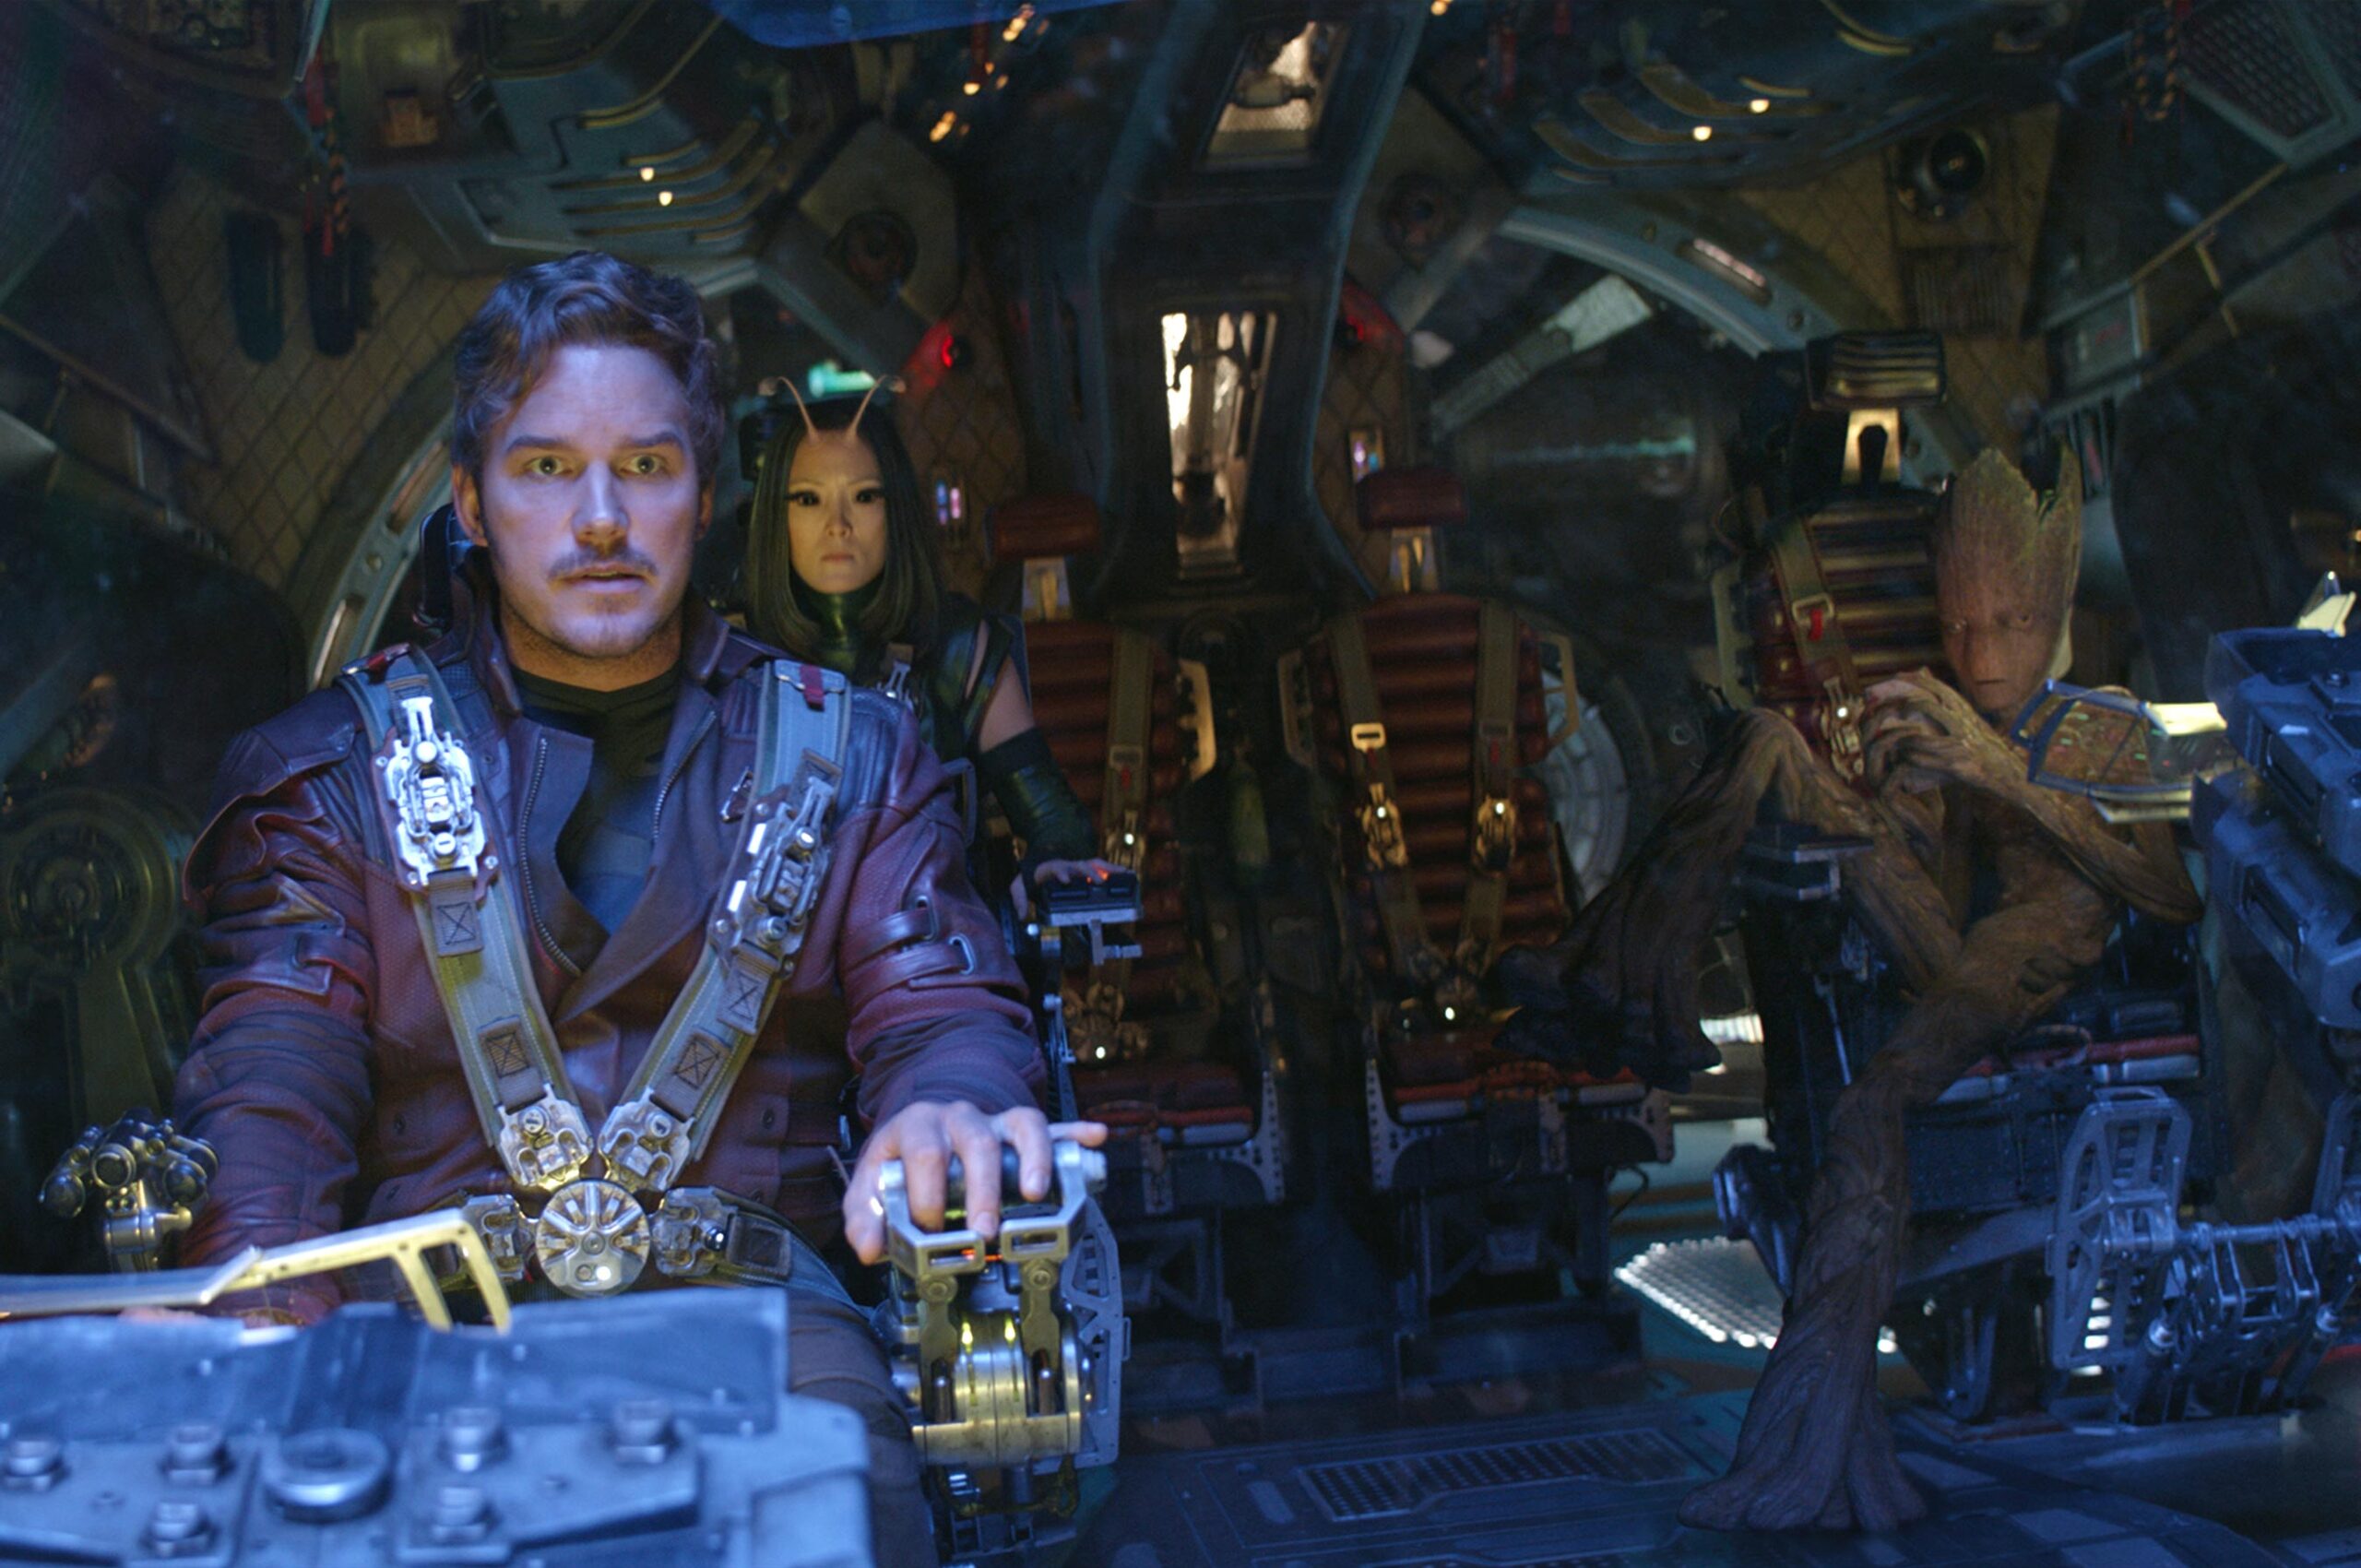 Guardians Of The Galaxy In Avengers Infinity War Movie In 2560x1700 Resolut...